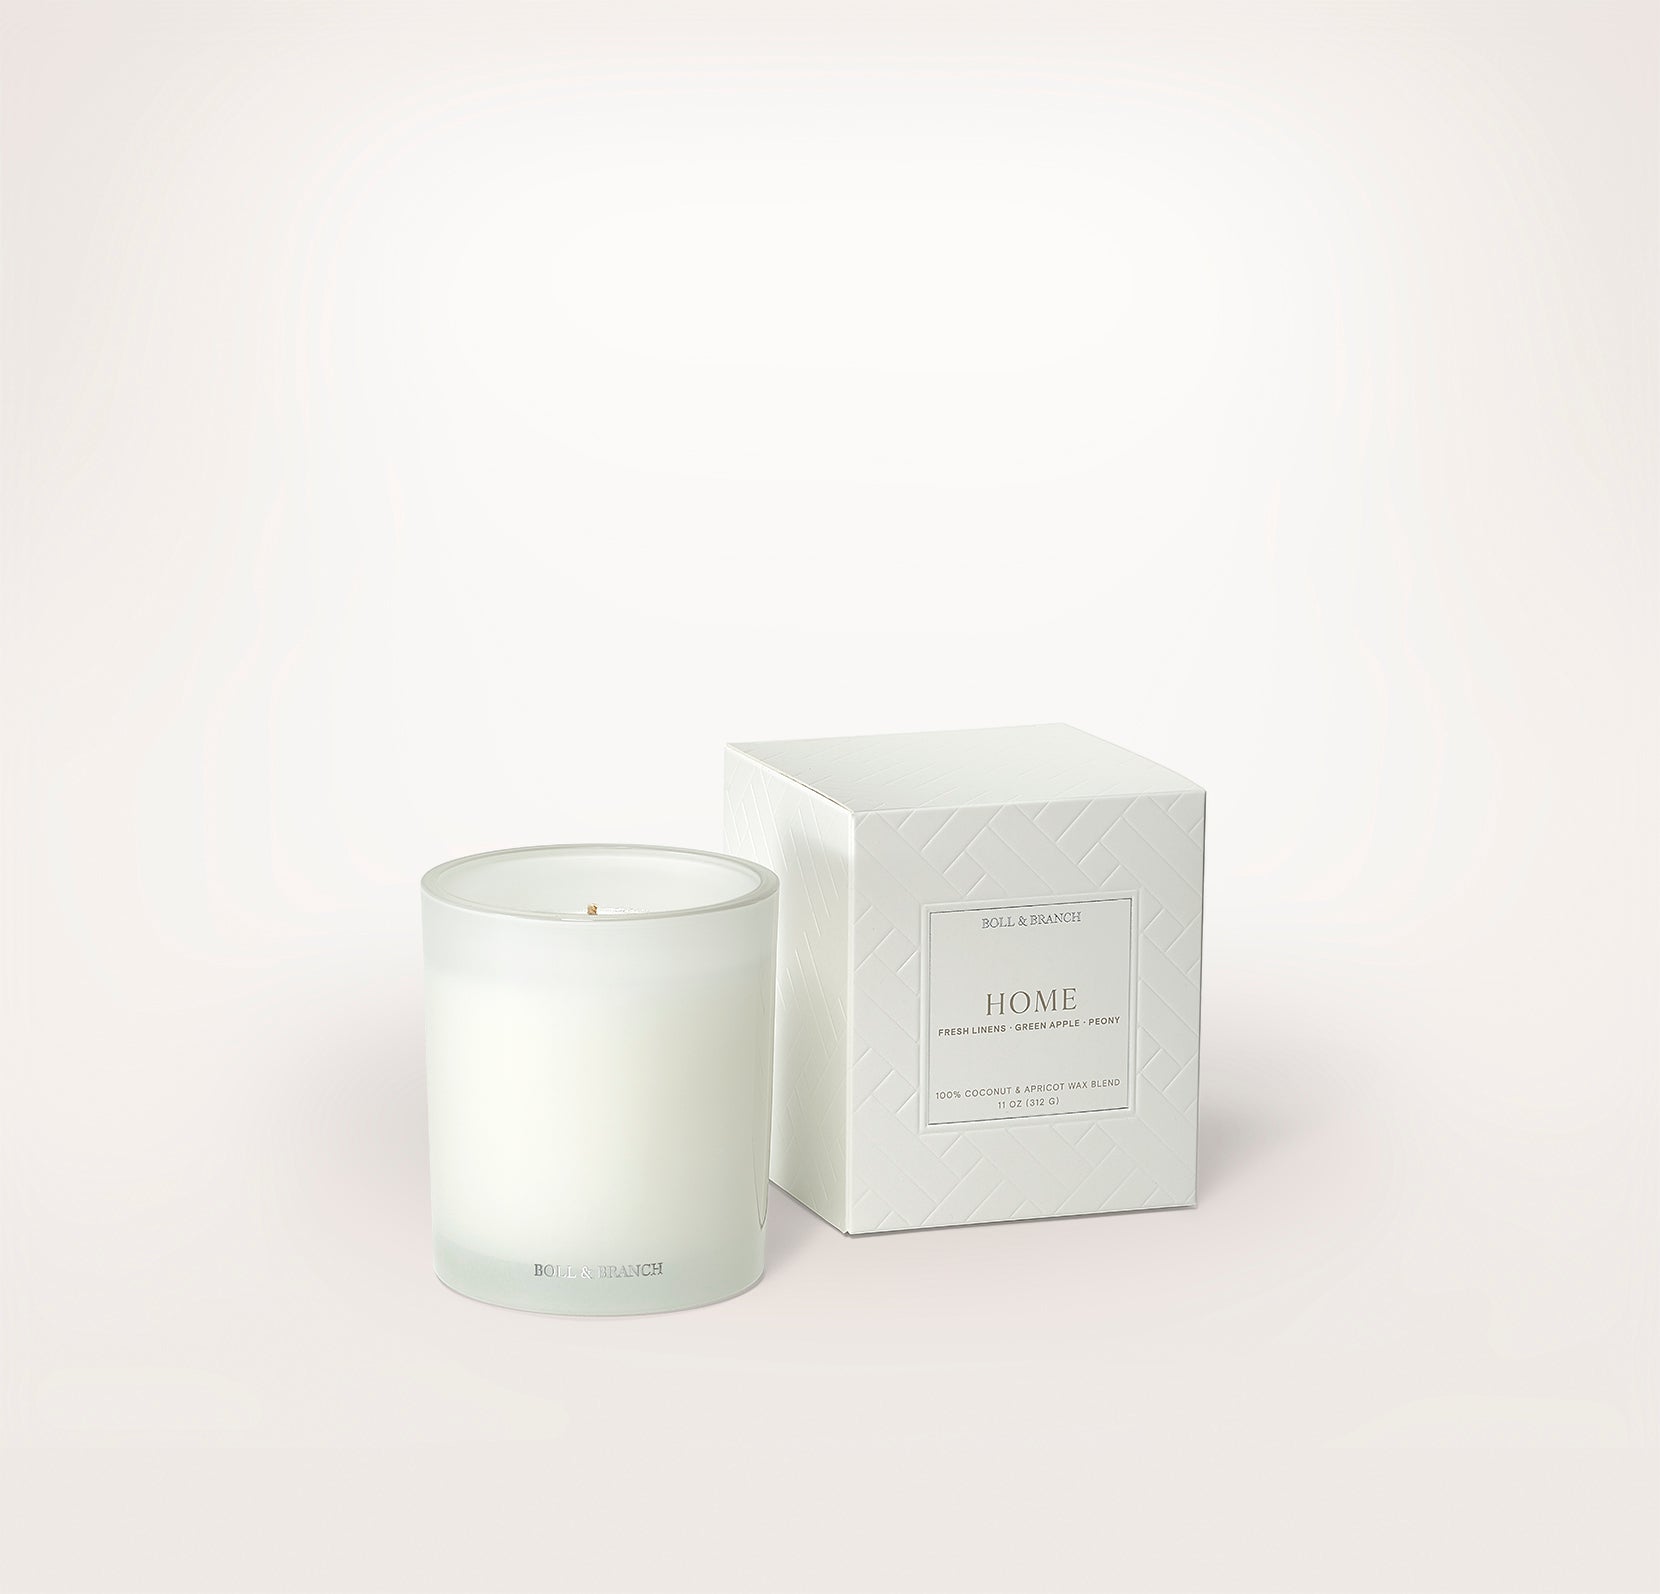 Single Wick Candle in Shore